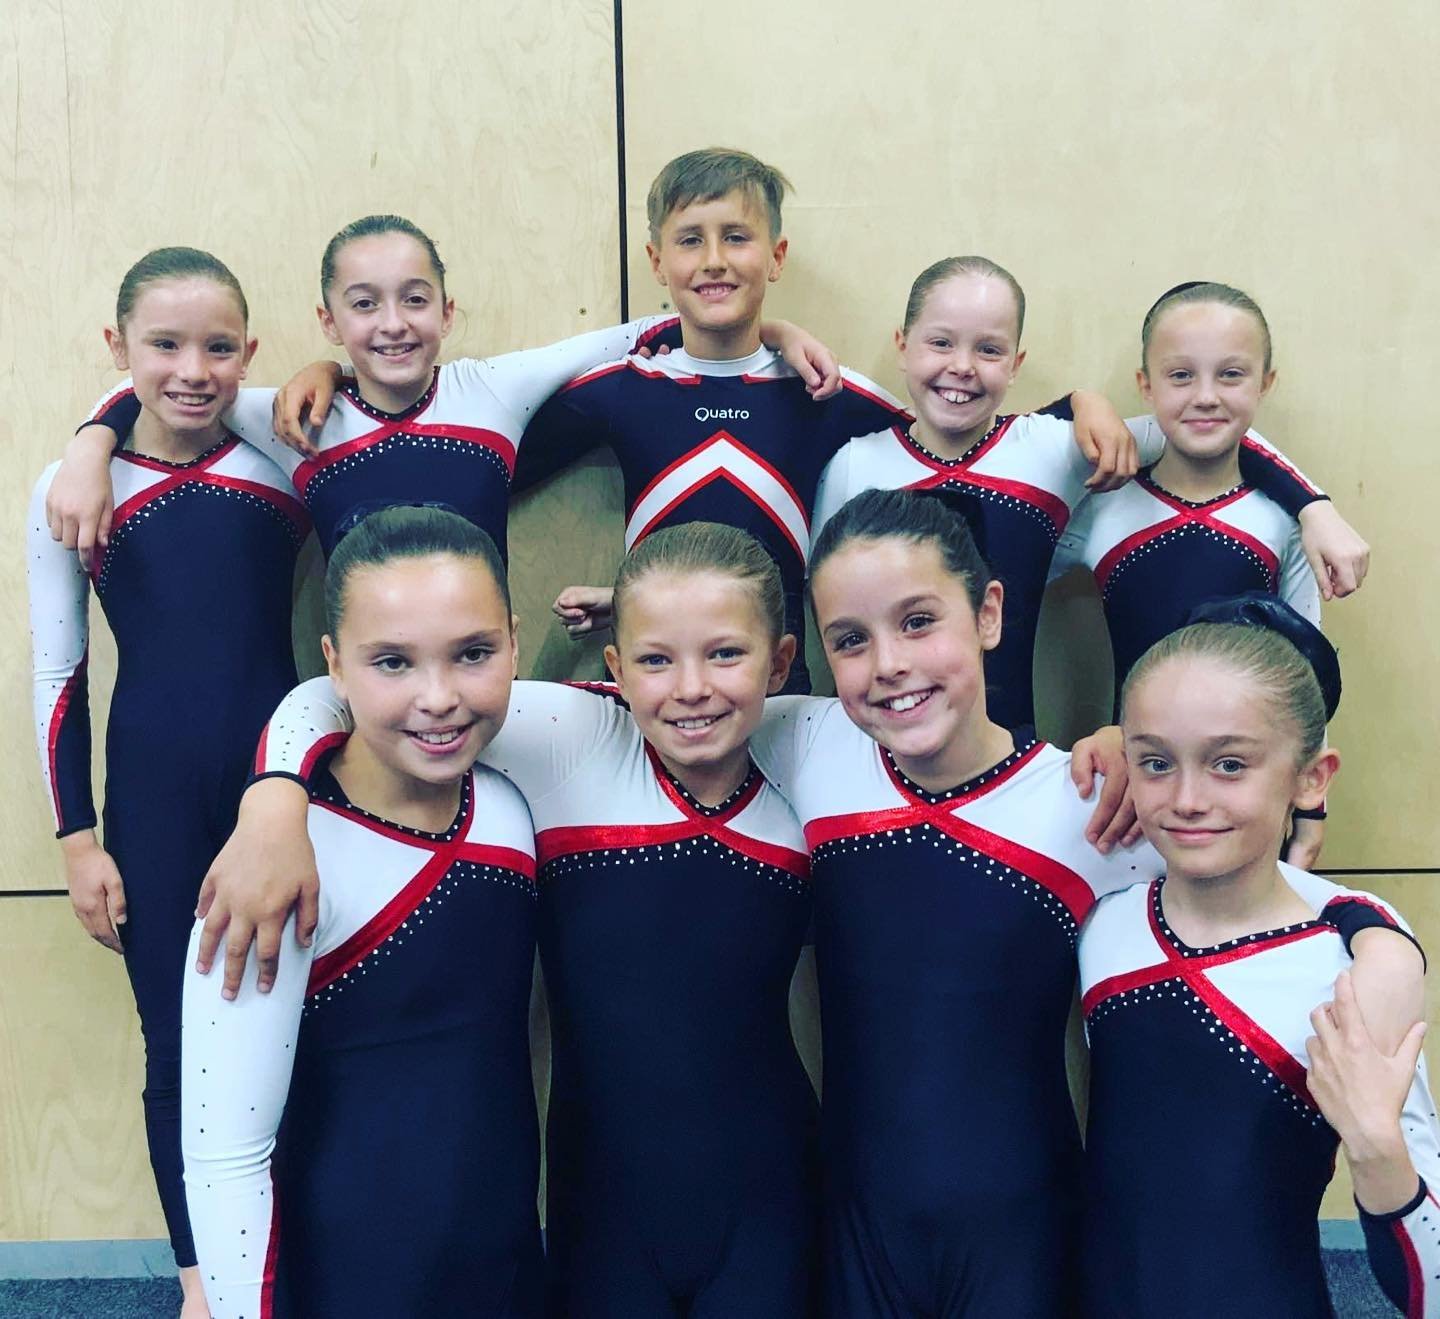 Today brought the primary teams to the floor - Primary Black posted strong Trampette and Tumble scores to finish in a well deserved 4th place!

Congratulations to you all!!

@britishgymnasticsofficial @bracknellforest @welovebracknell @everyoneactive